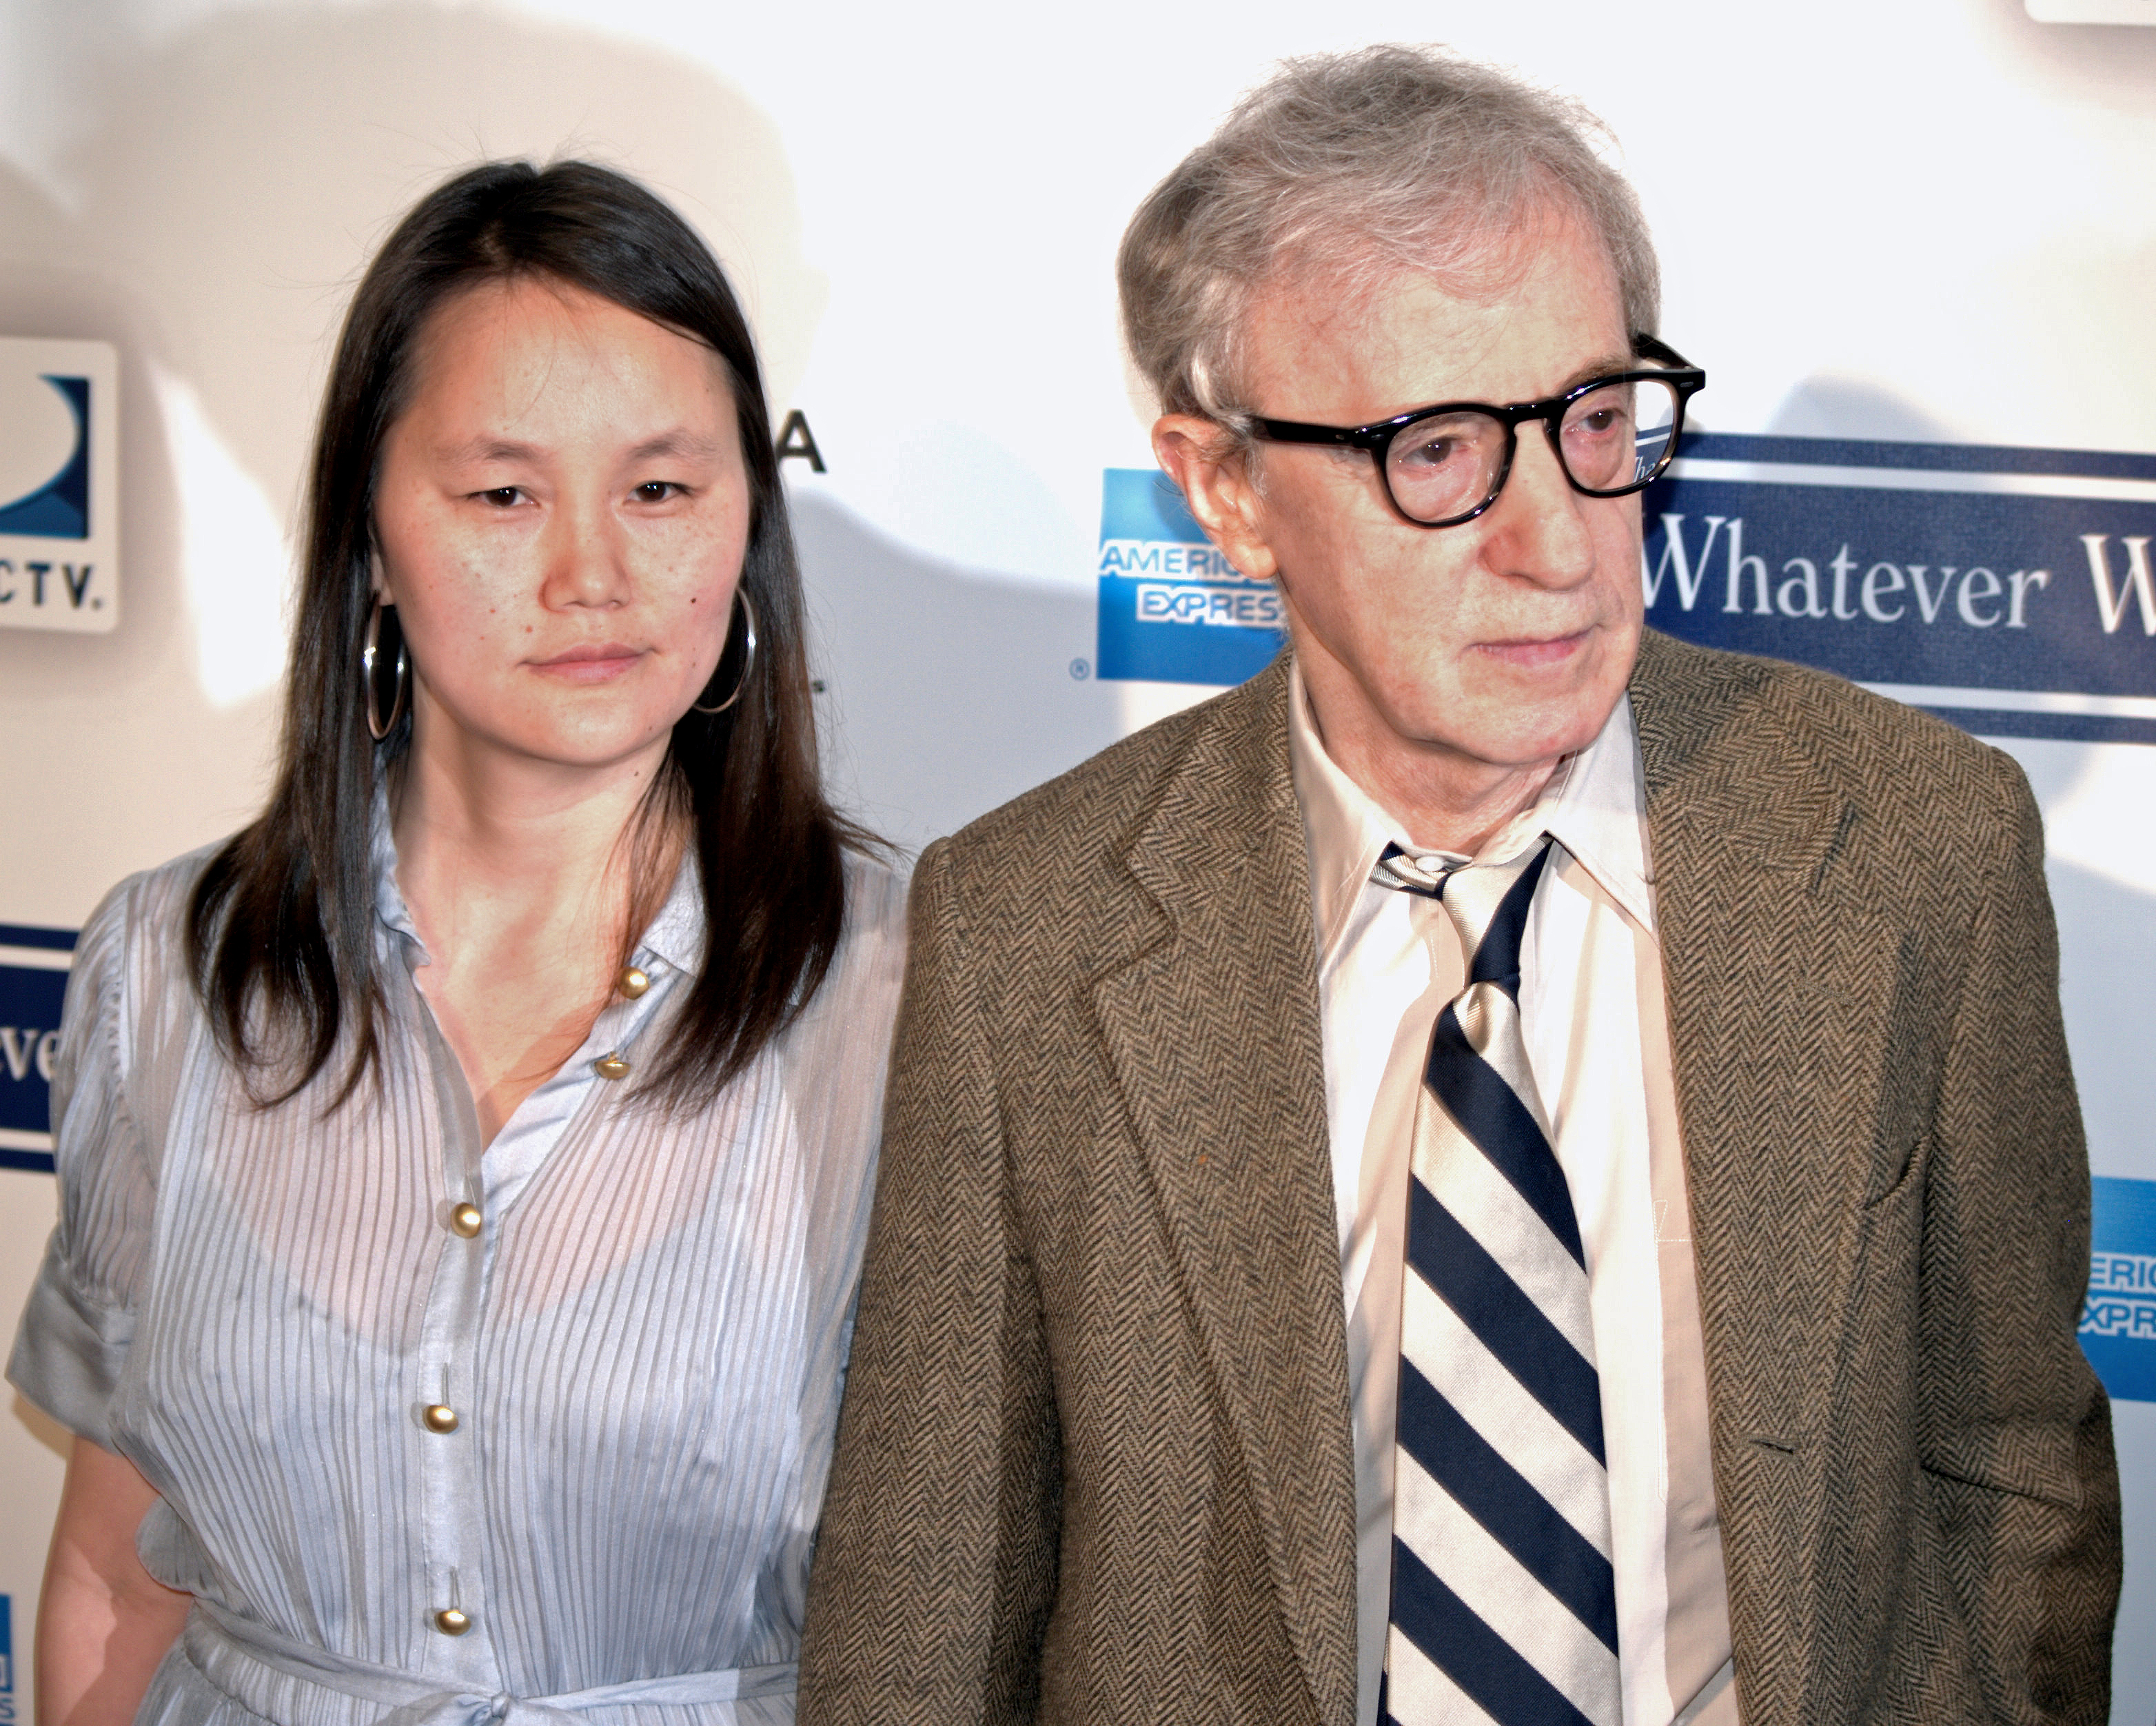 http://upload.wikimedia.org/wikipedia/commons/6/65/Soon_Yi_Previn_and_Woody_Allen_at_the_Tribeca_Film_Festival.jpg